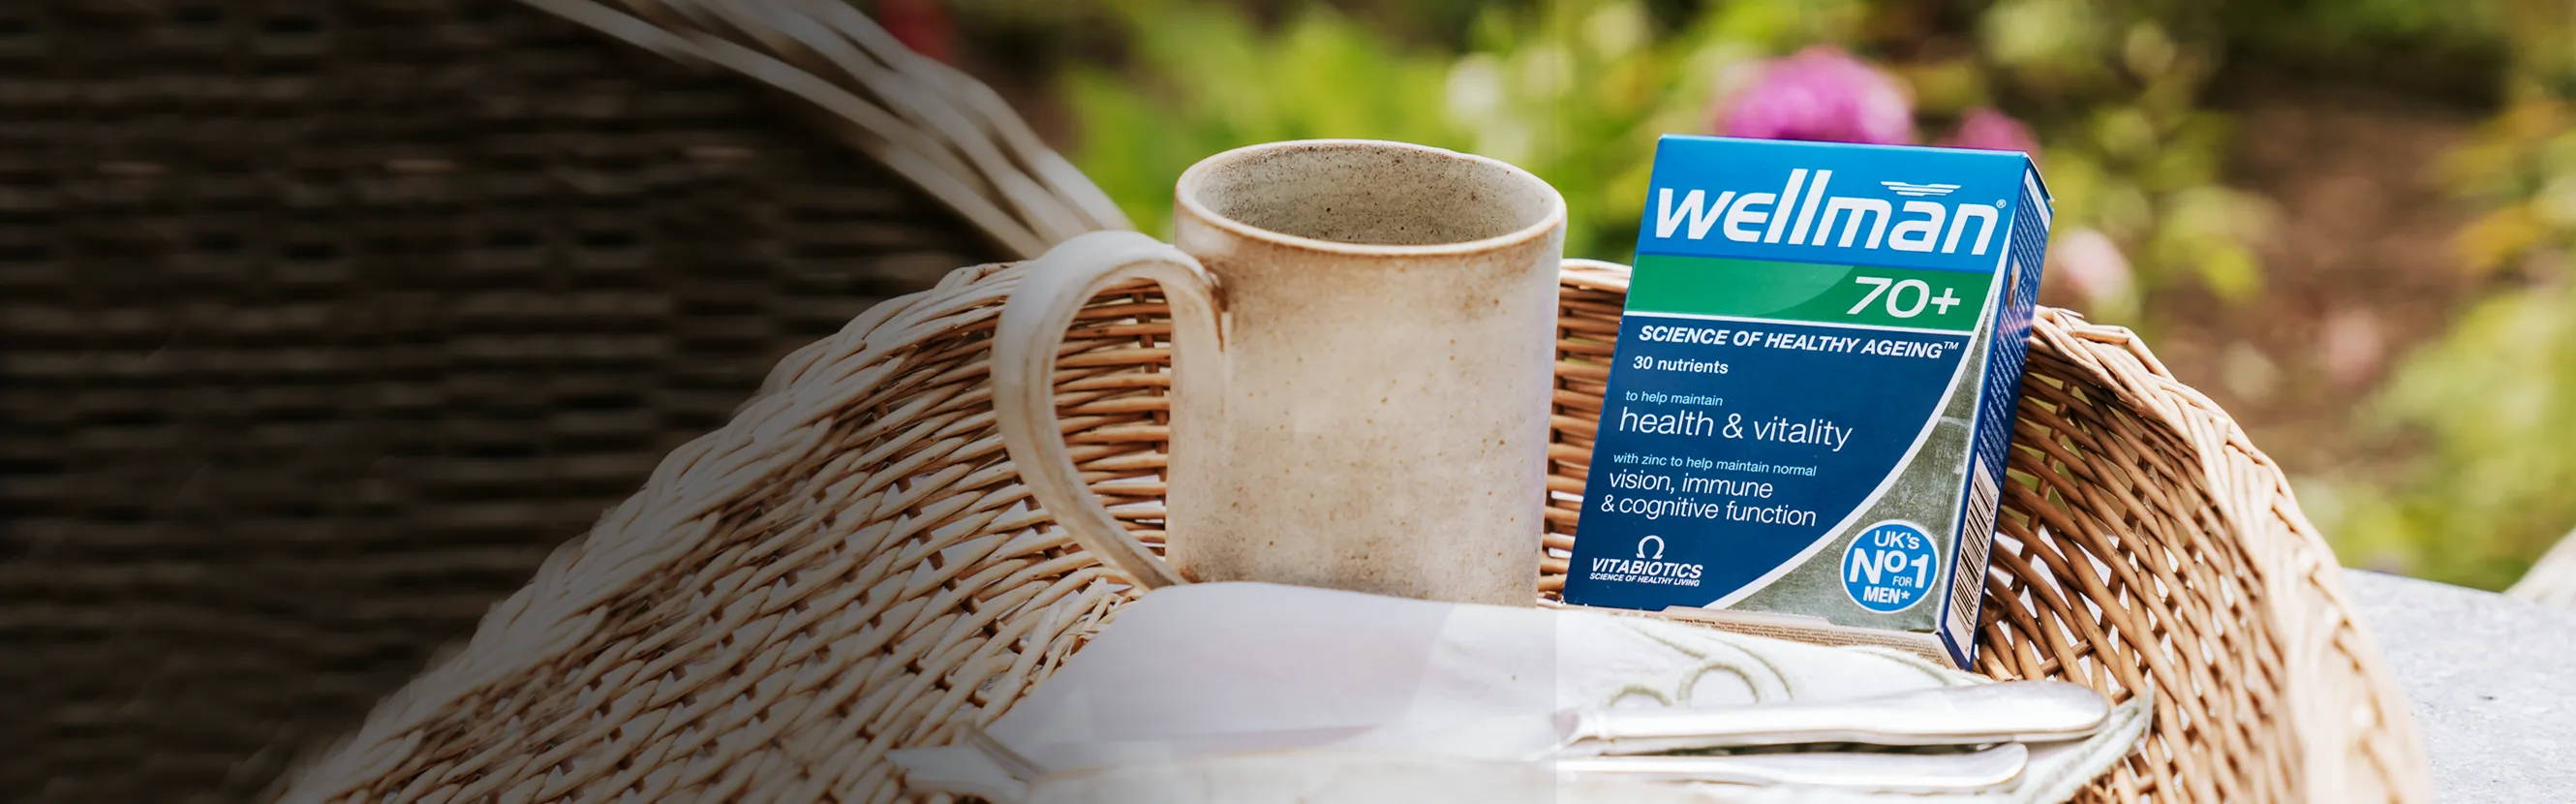  Wellman 70+ provides a comprehensive range of 30 vitamins, trace elements and specialist advanced nutrients specifically formulated to help safeguard the nutritional needs of men aged 70 and above. 